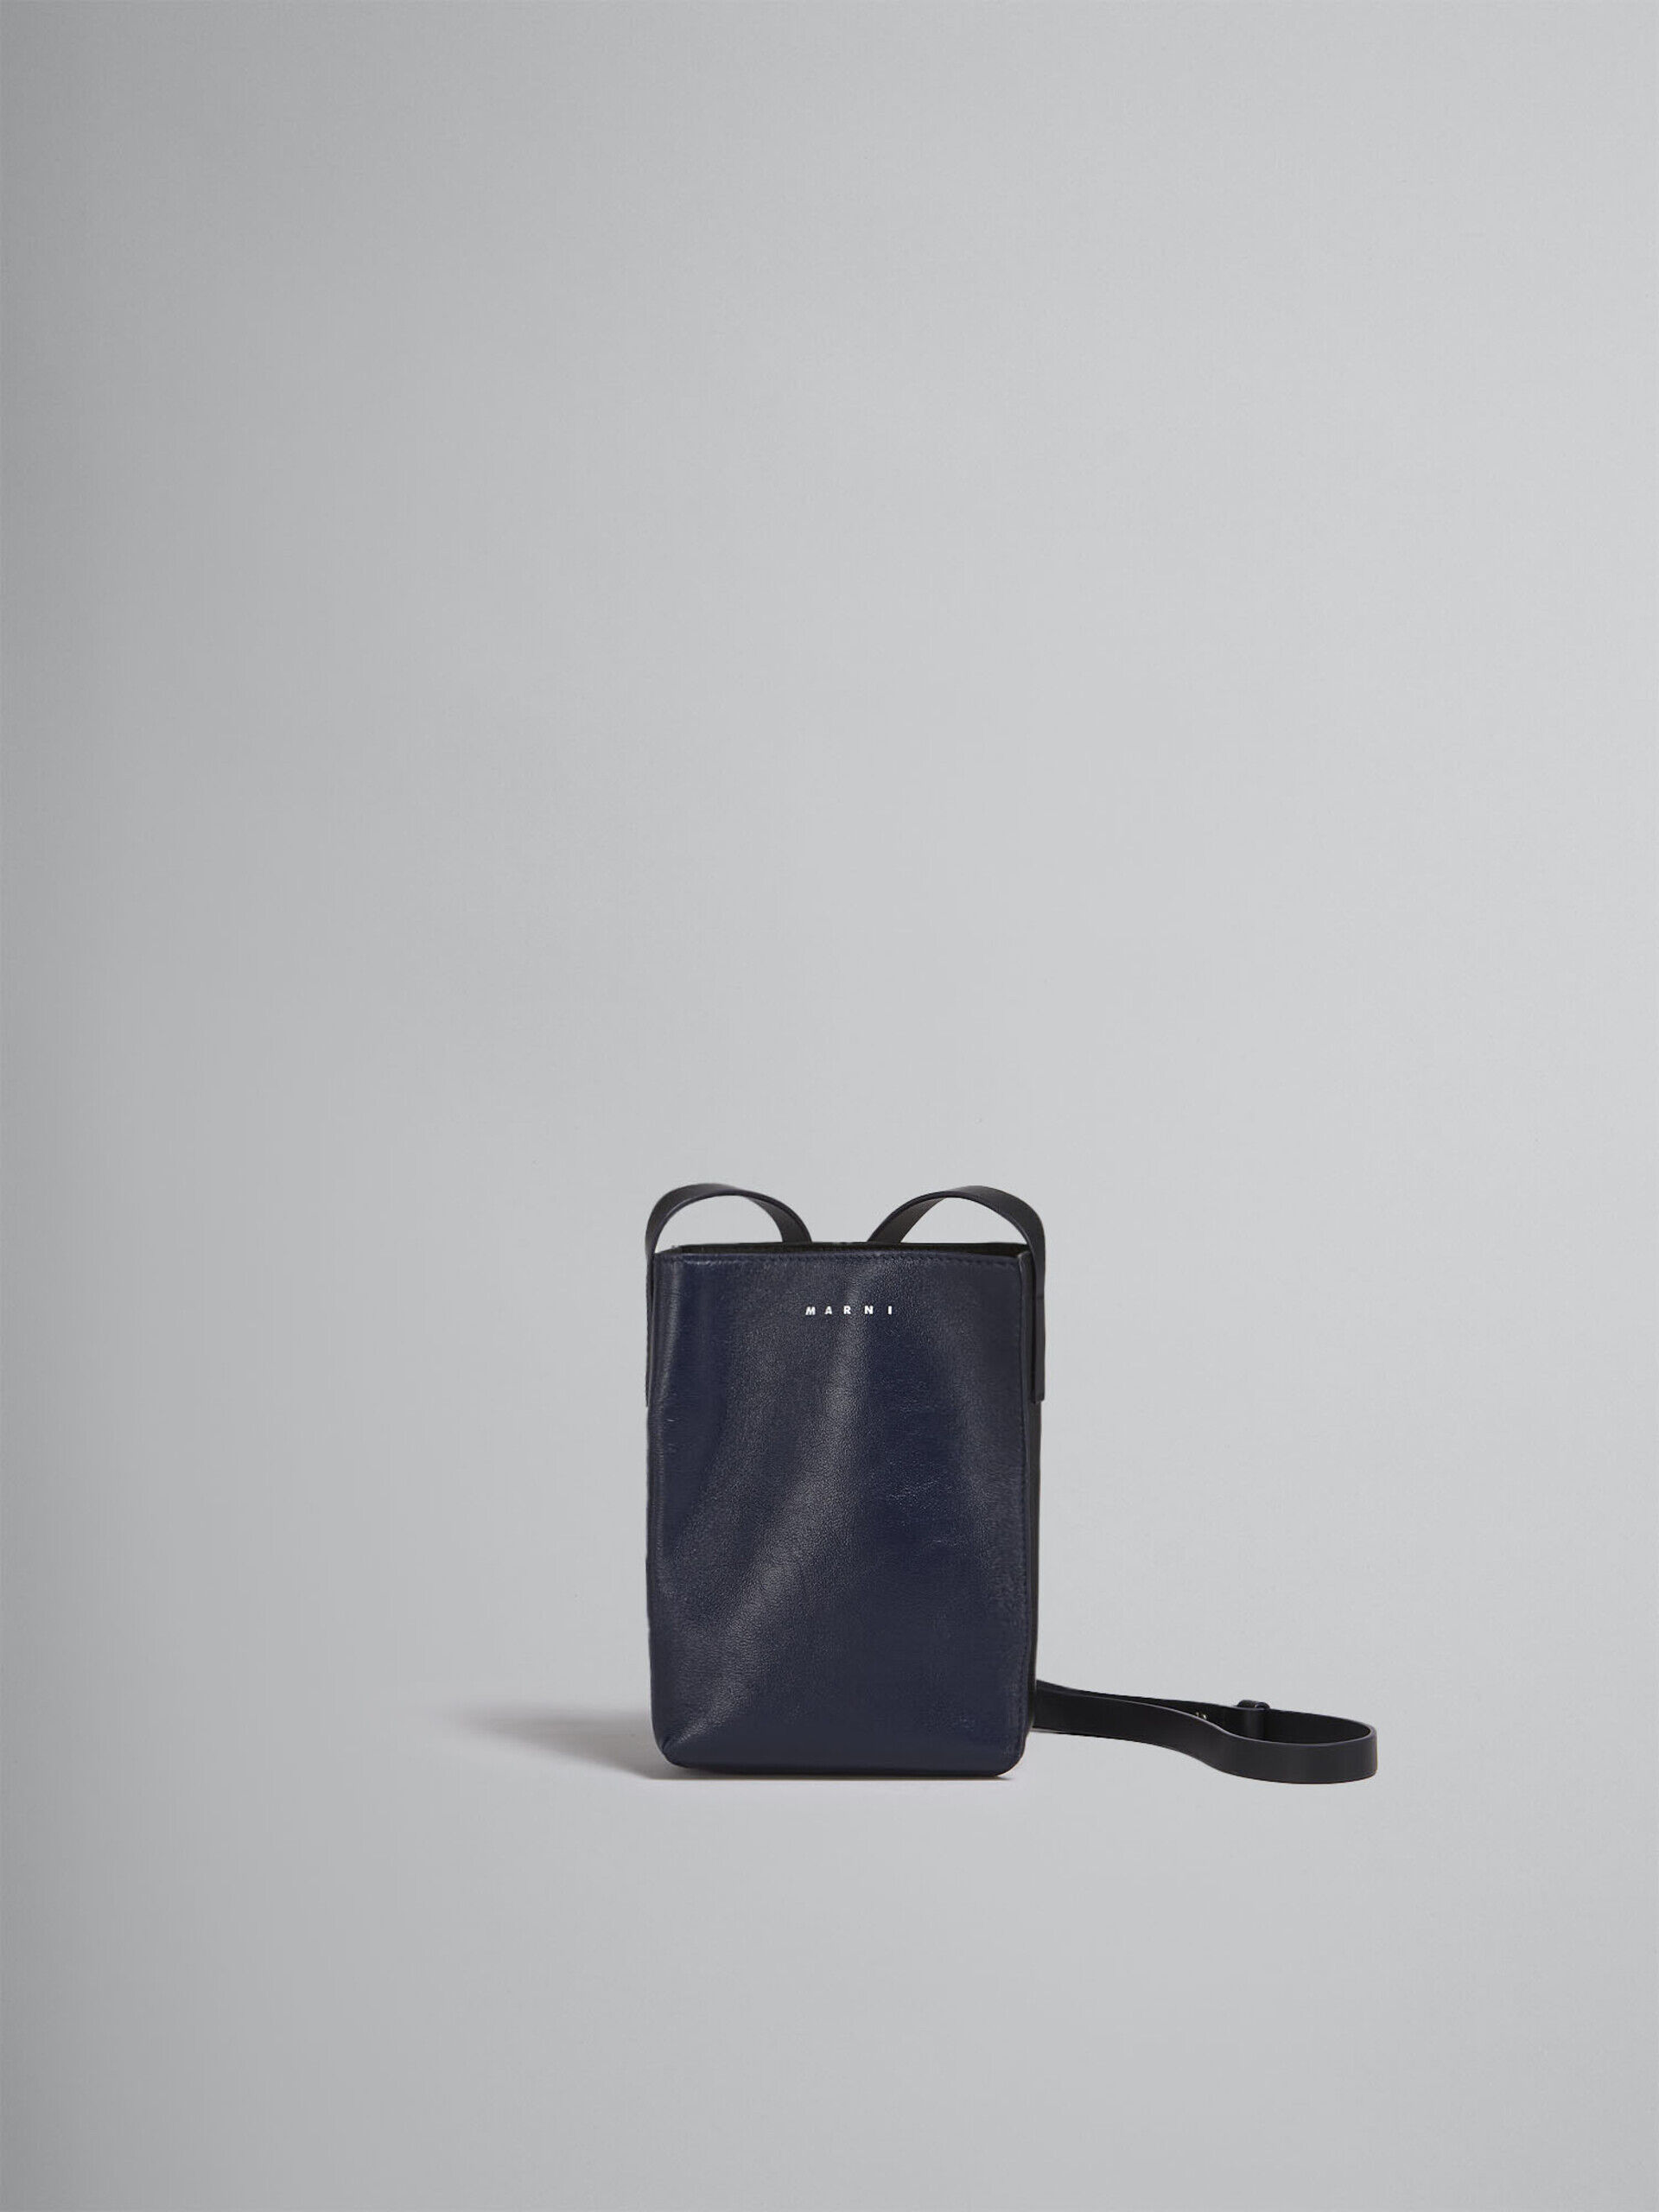 Museo Soft Small Bag in blue and black leather | Marni